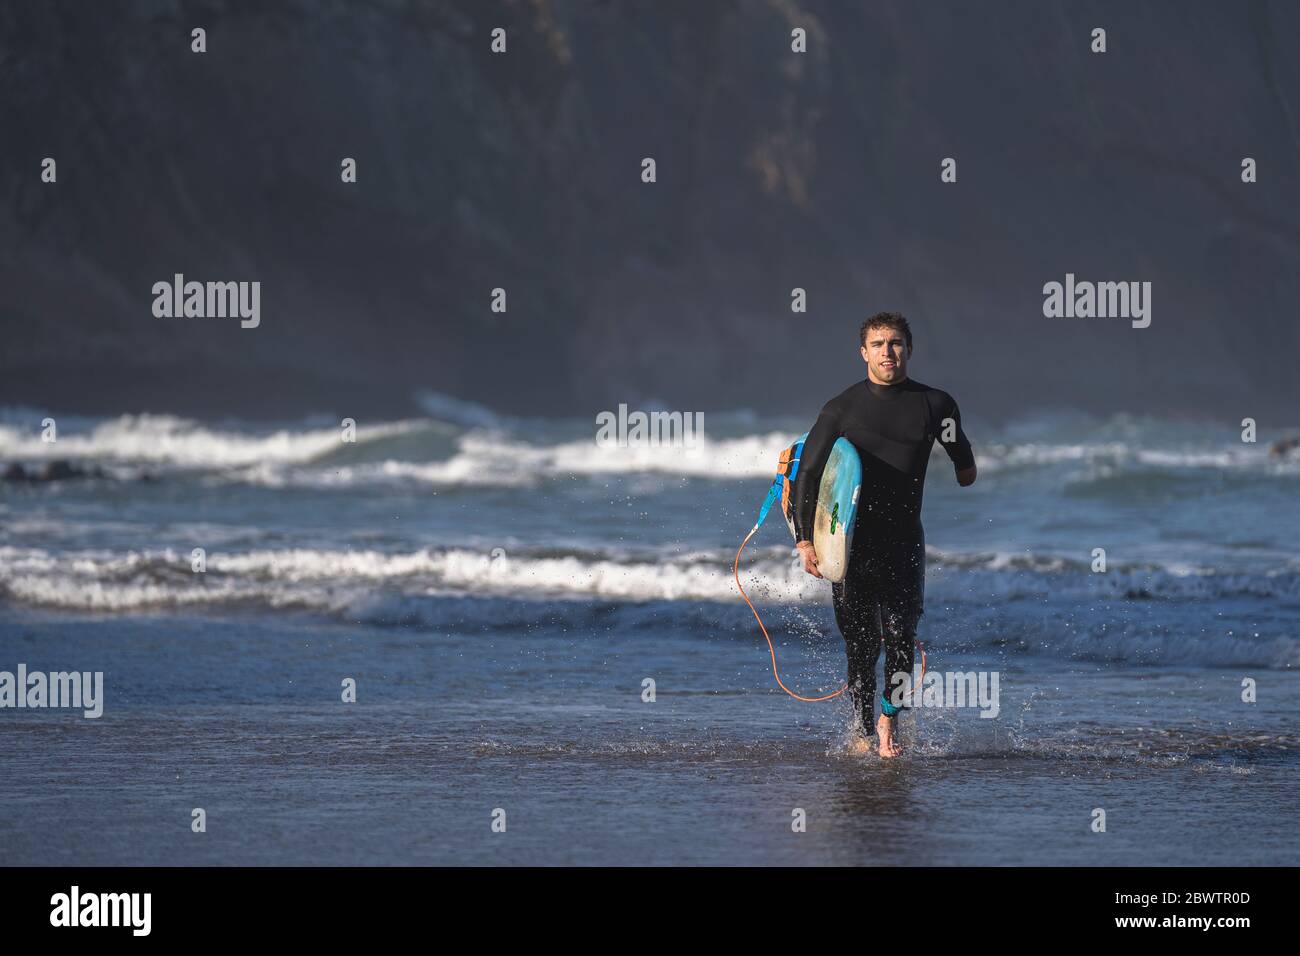 Handicapped surfer with surfboard running at beach Stock Photo